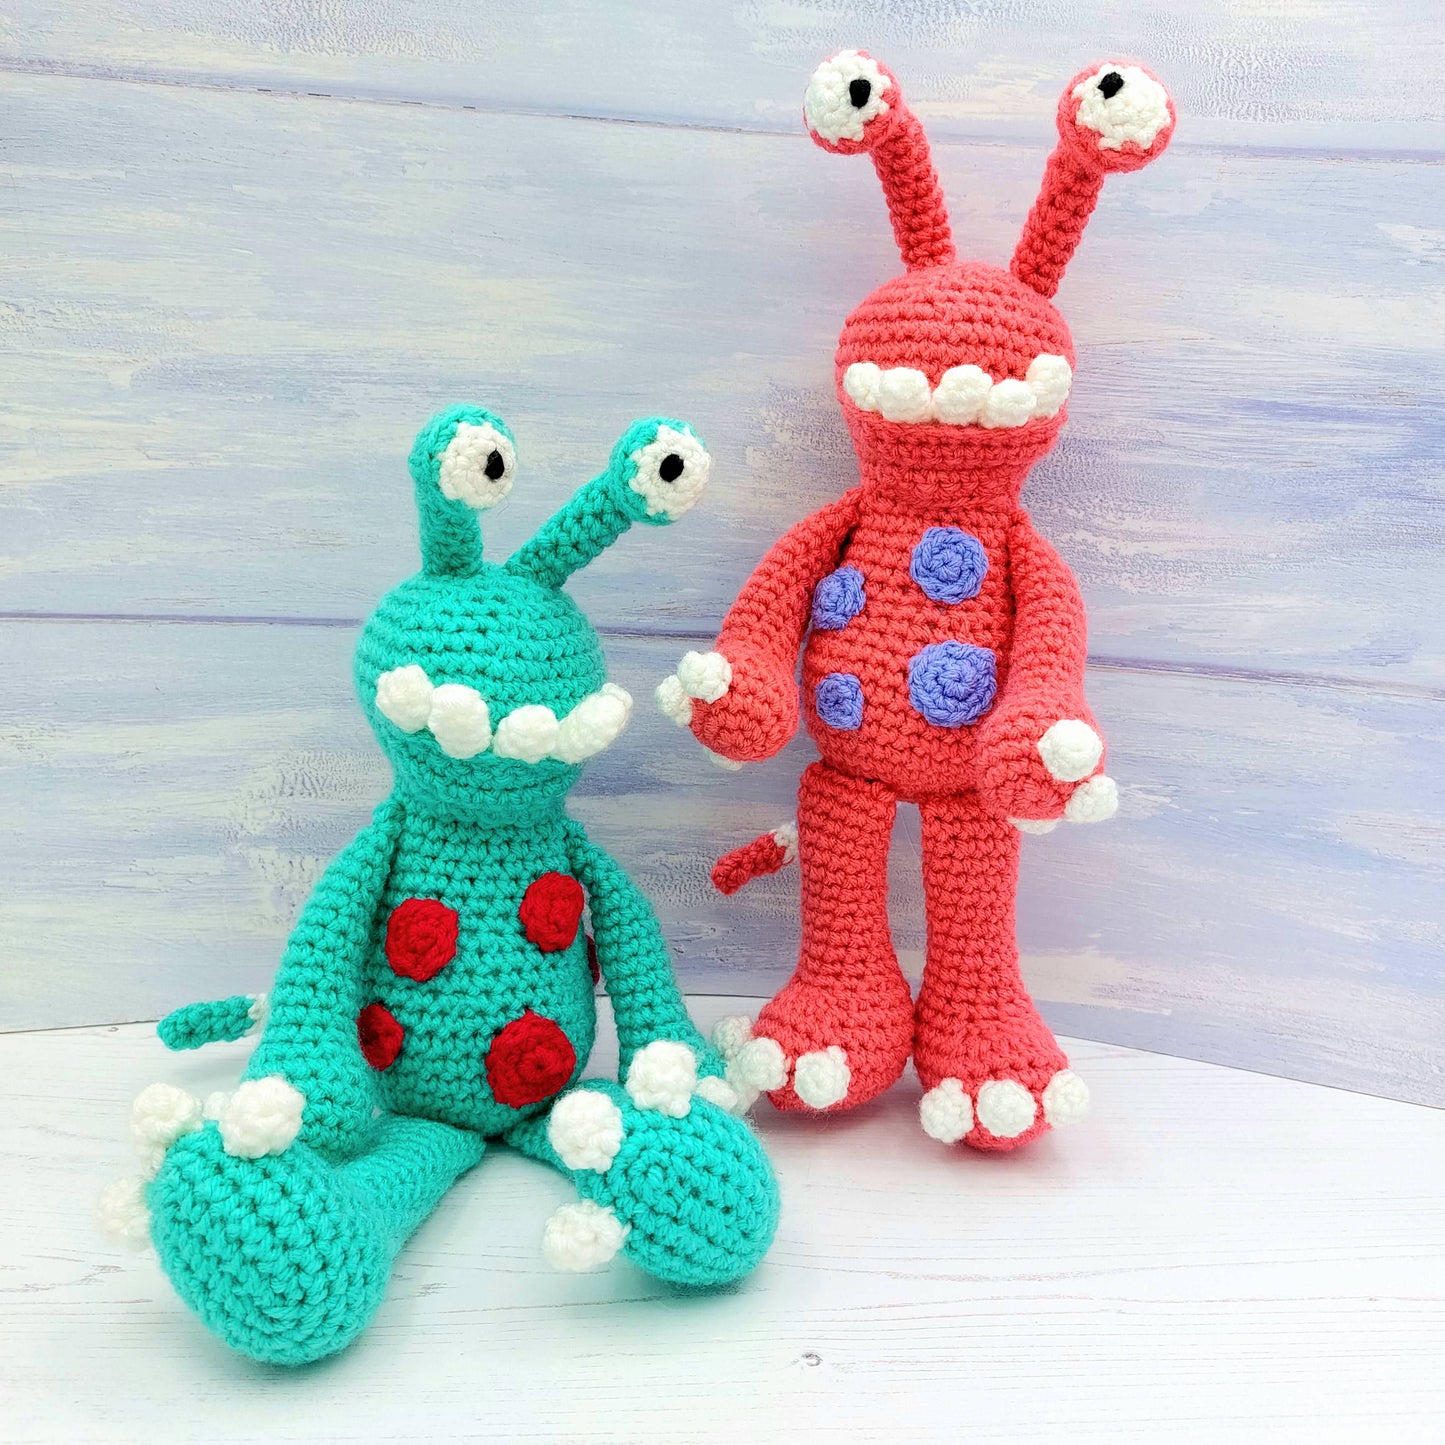 Remake kits -  remake your favourite Woolly Wonderful!